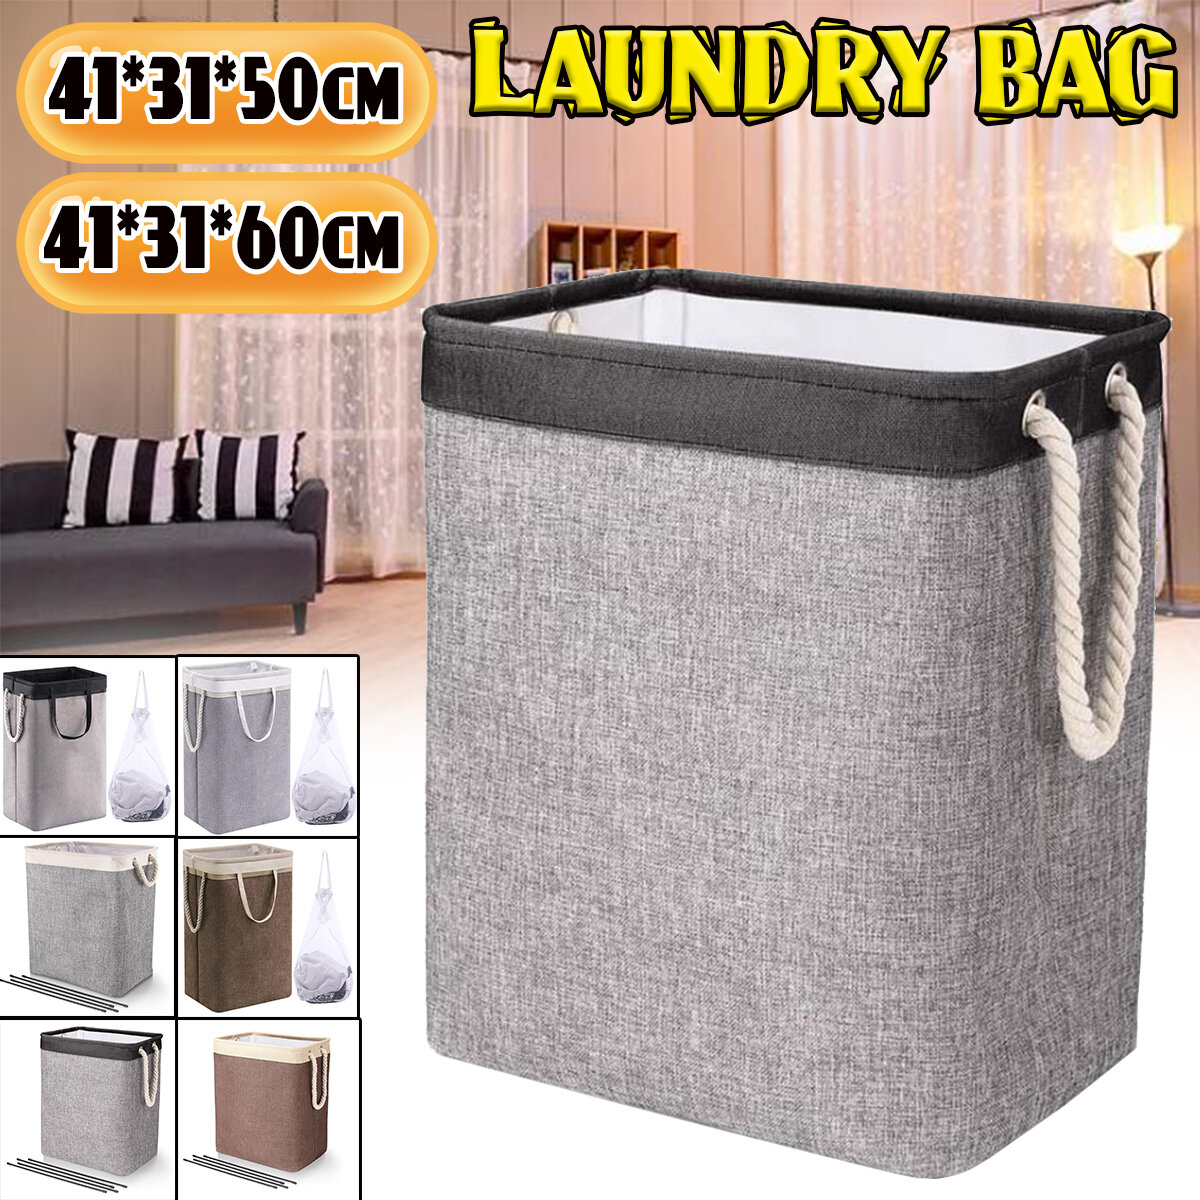 

Waterproof Foldable Laundry Basket With Handle Large Dirty Clothes/Toys/Debris Multifunction Storage Basket